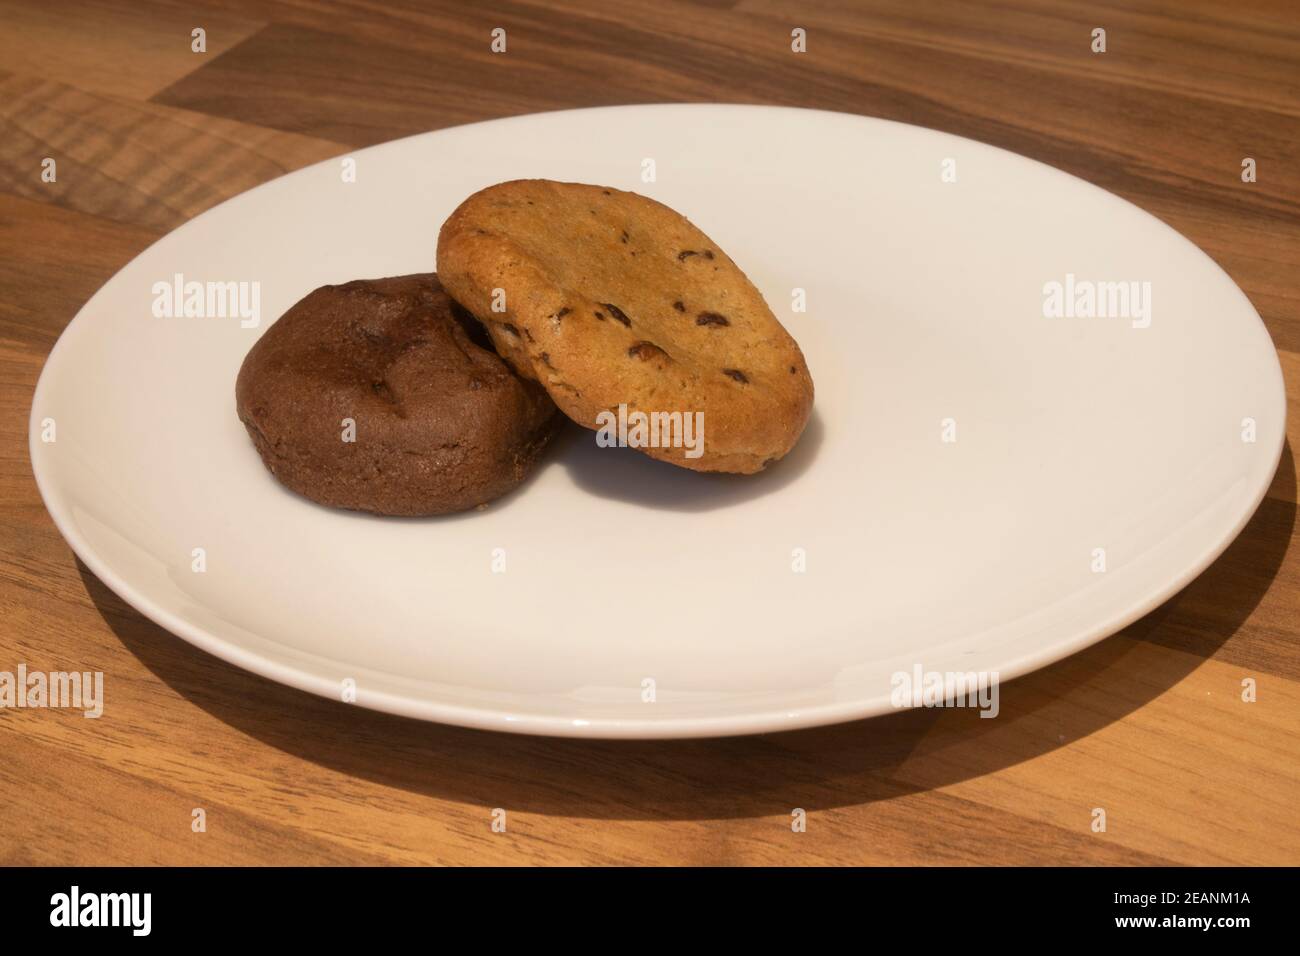 Cookies laid on a plate Stock Photo